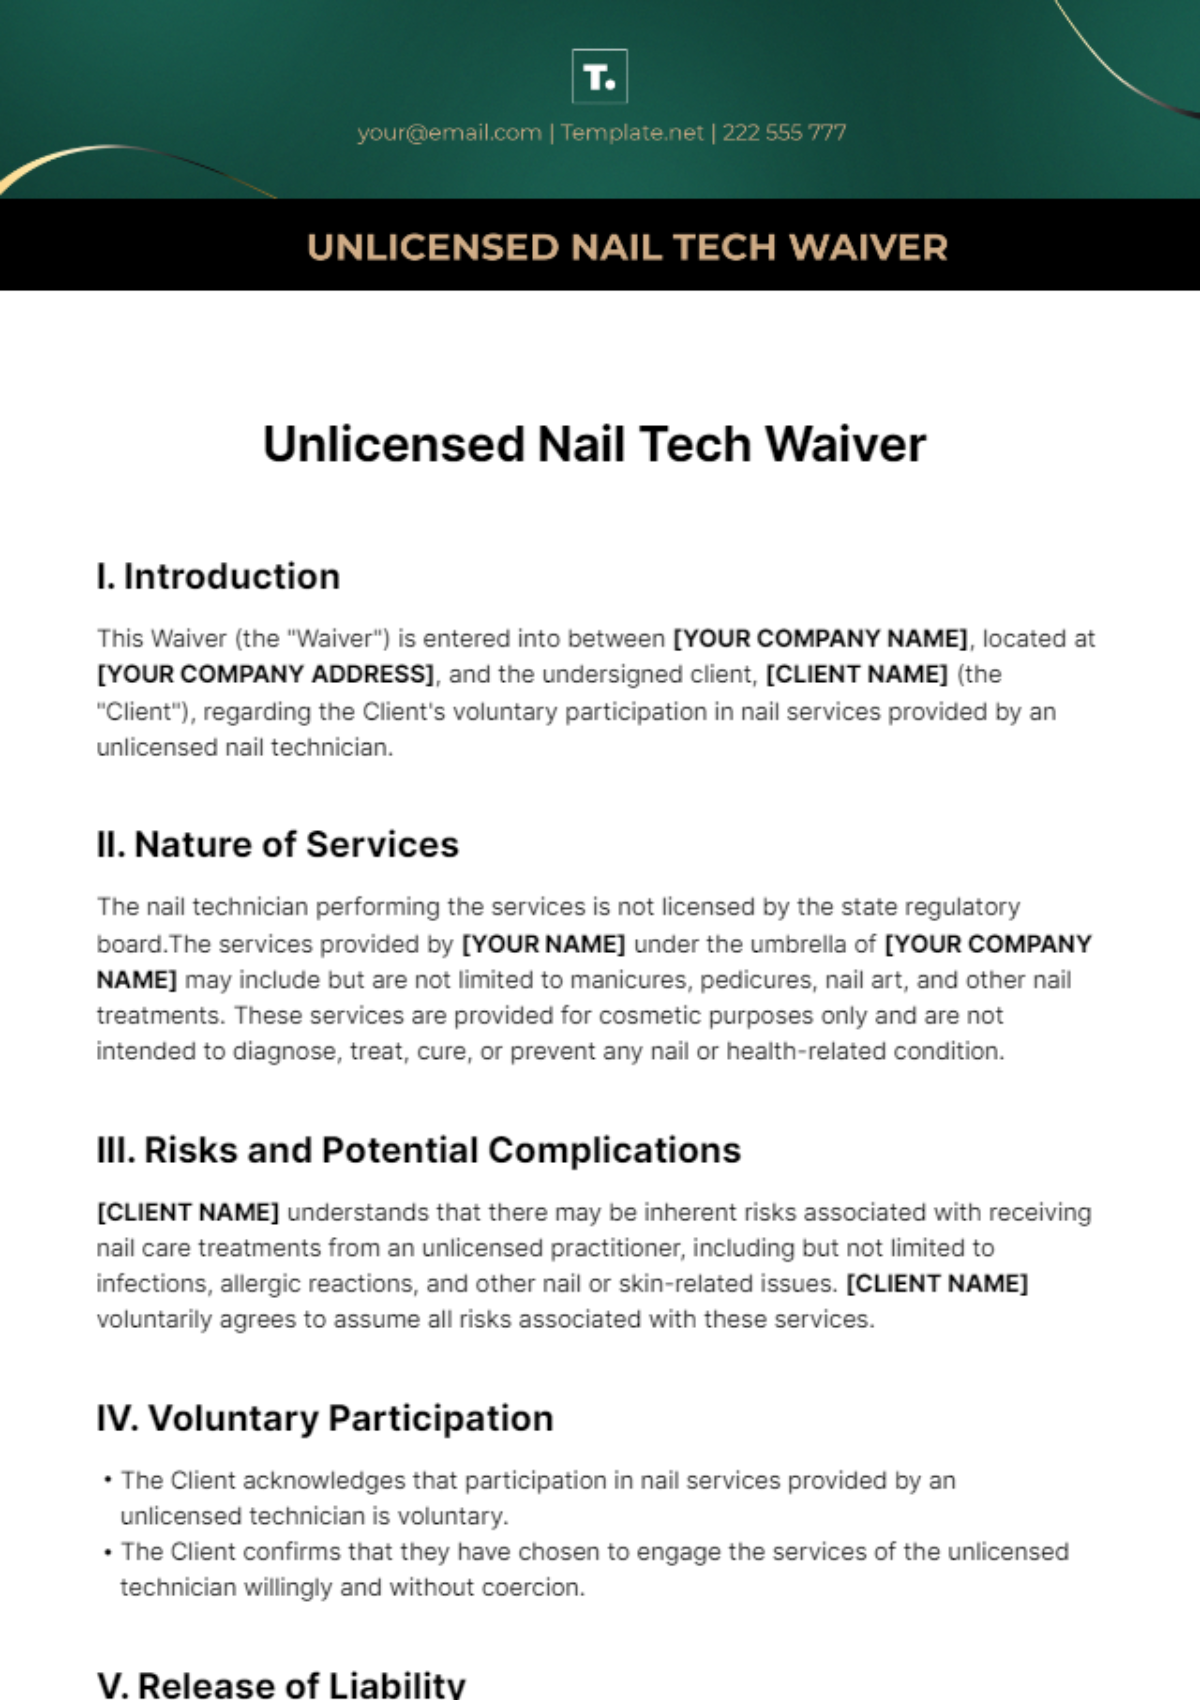 Unlicensed Nail Tech Waiver Template